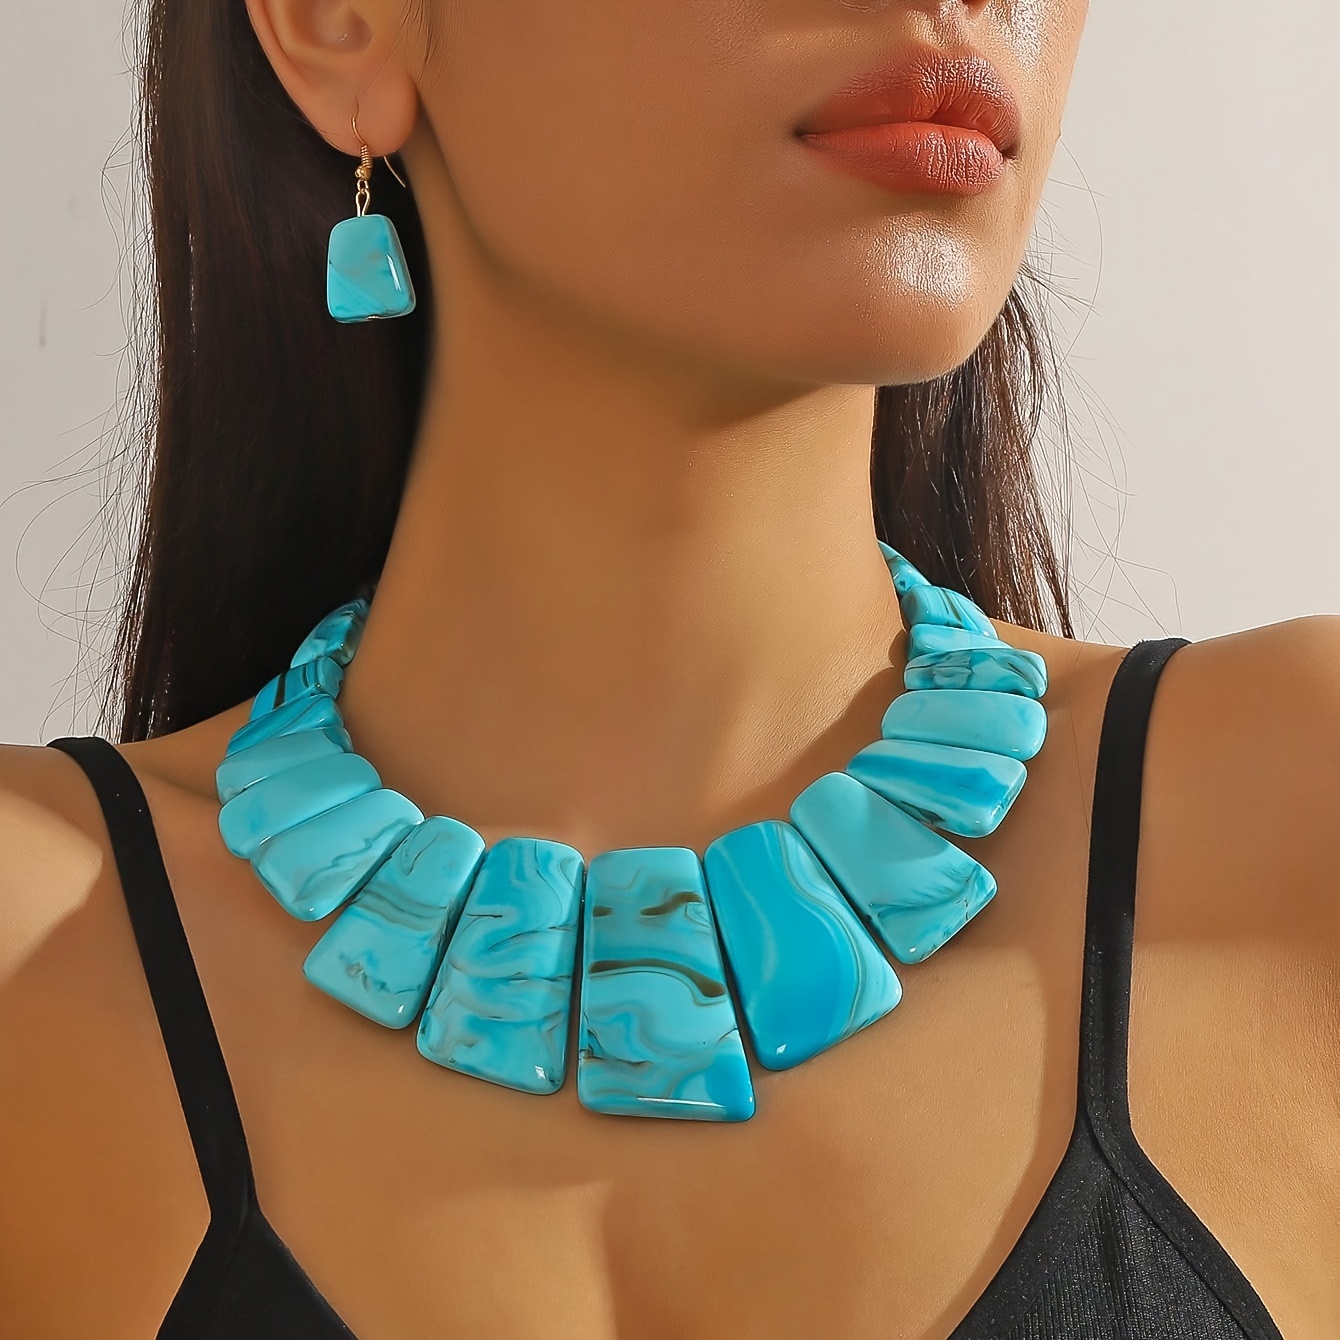 

Vintage-inspired Turquoise Necklace And Earrings Set - April Birthstone, Synthetic Stone, Acrylic Material, Suitable For Gifts And Parties